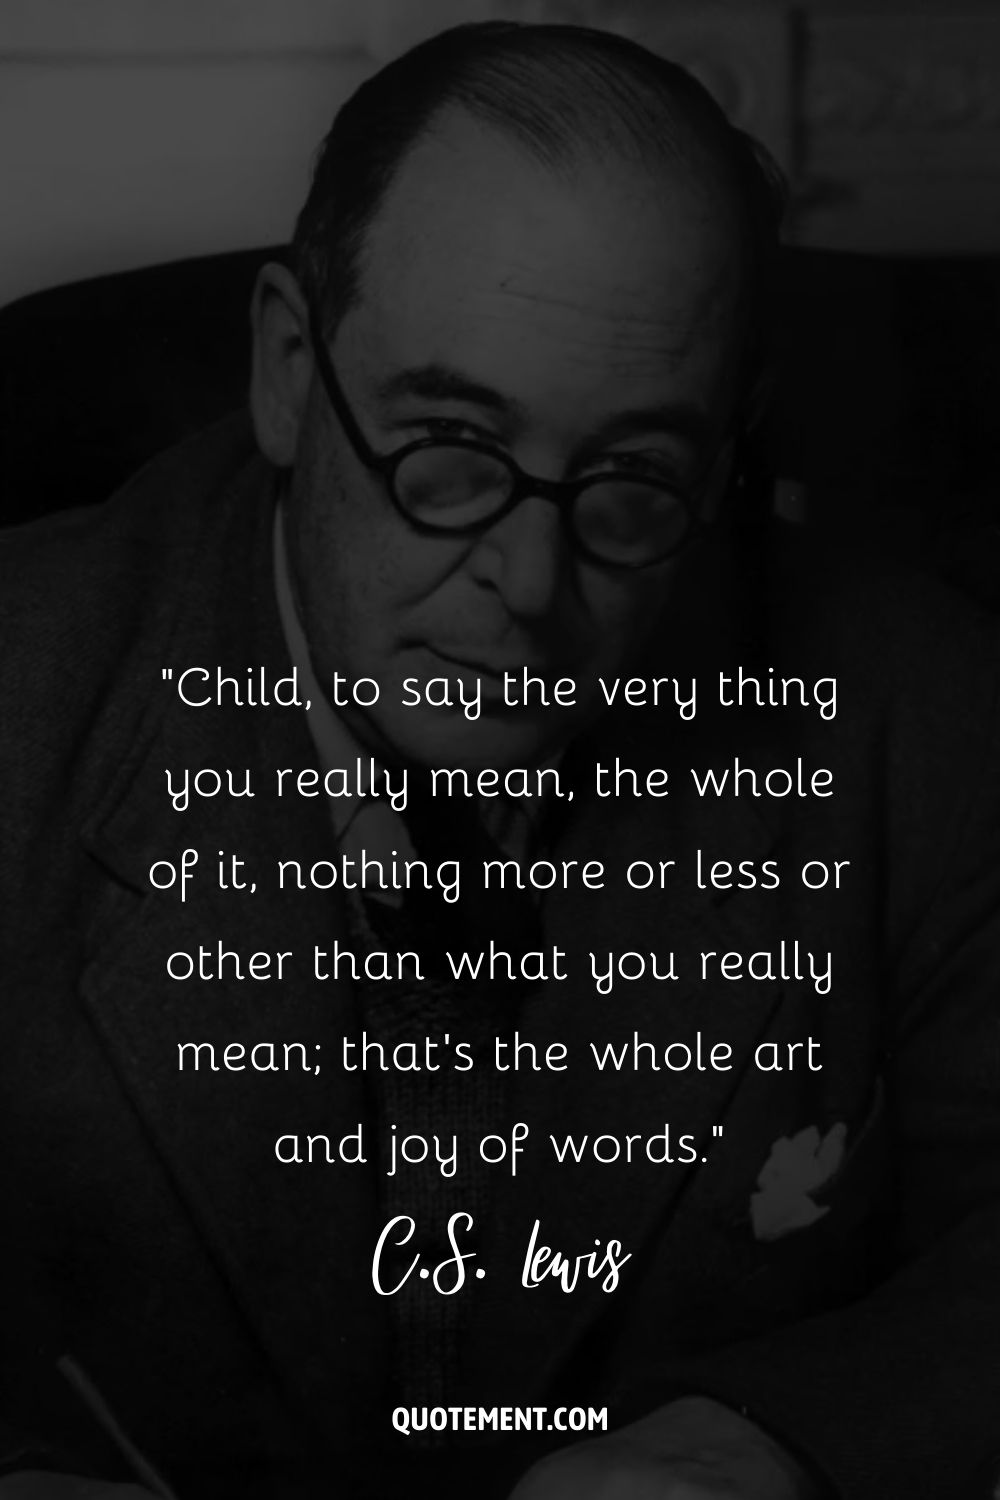 C.S. Lewis sitting with pen in hand and glasses on